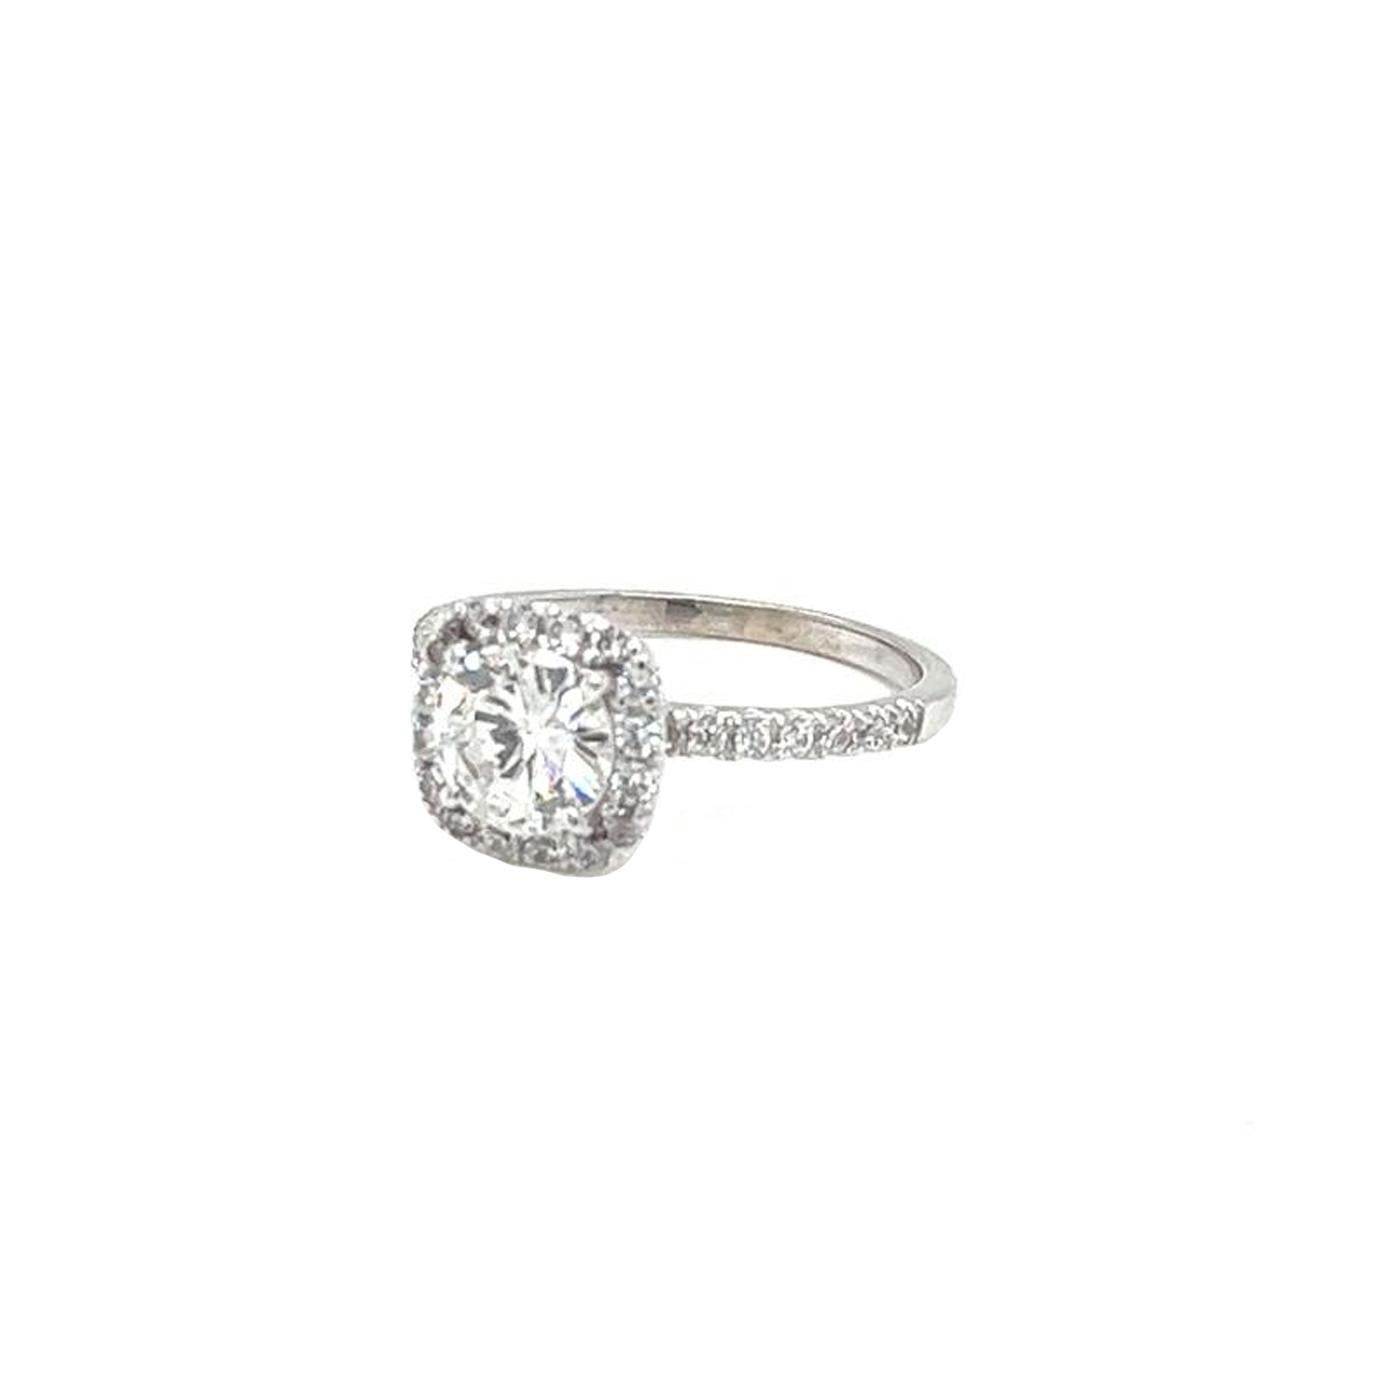 1.16ct Natural Round Diamond Ring With 0.45ct Pave Diamonds Color H Clarity VS2 For Sale 2